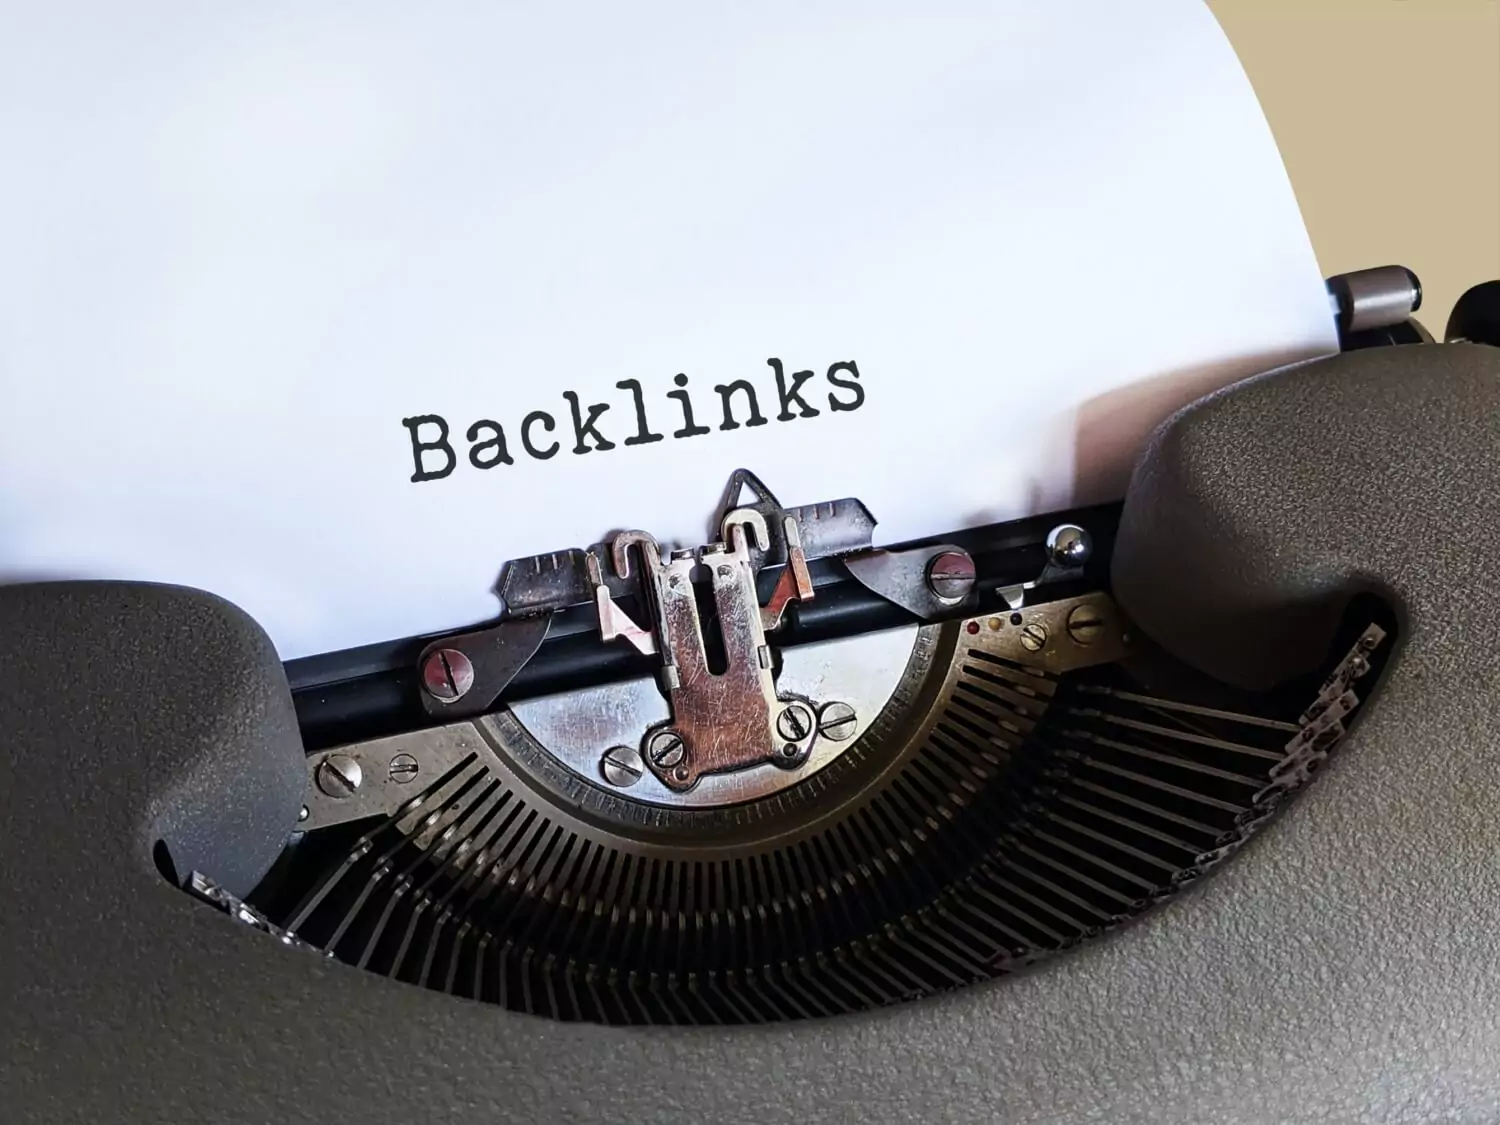 Search Engines Consider Backlinks As Important Ranking Factors for Your Website